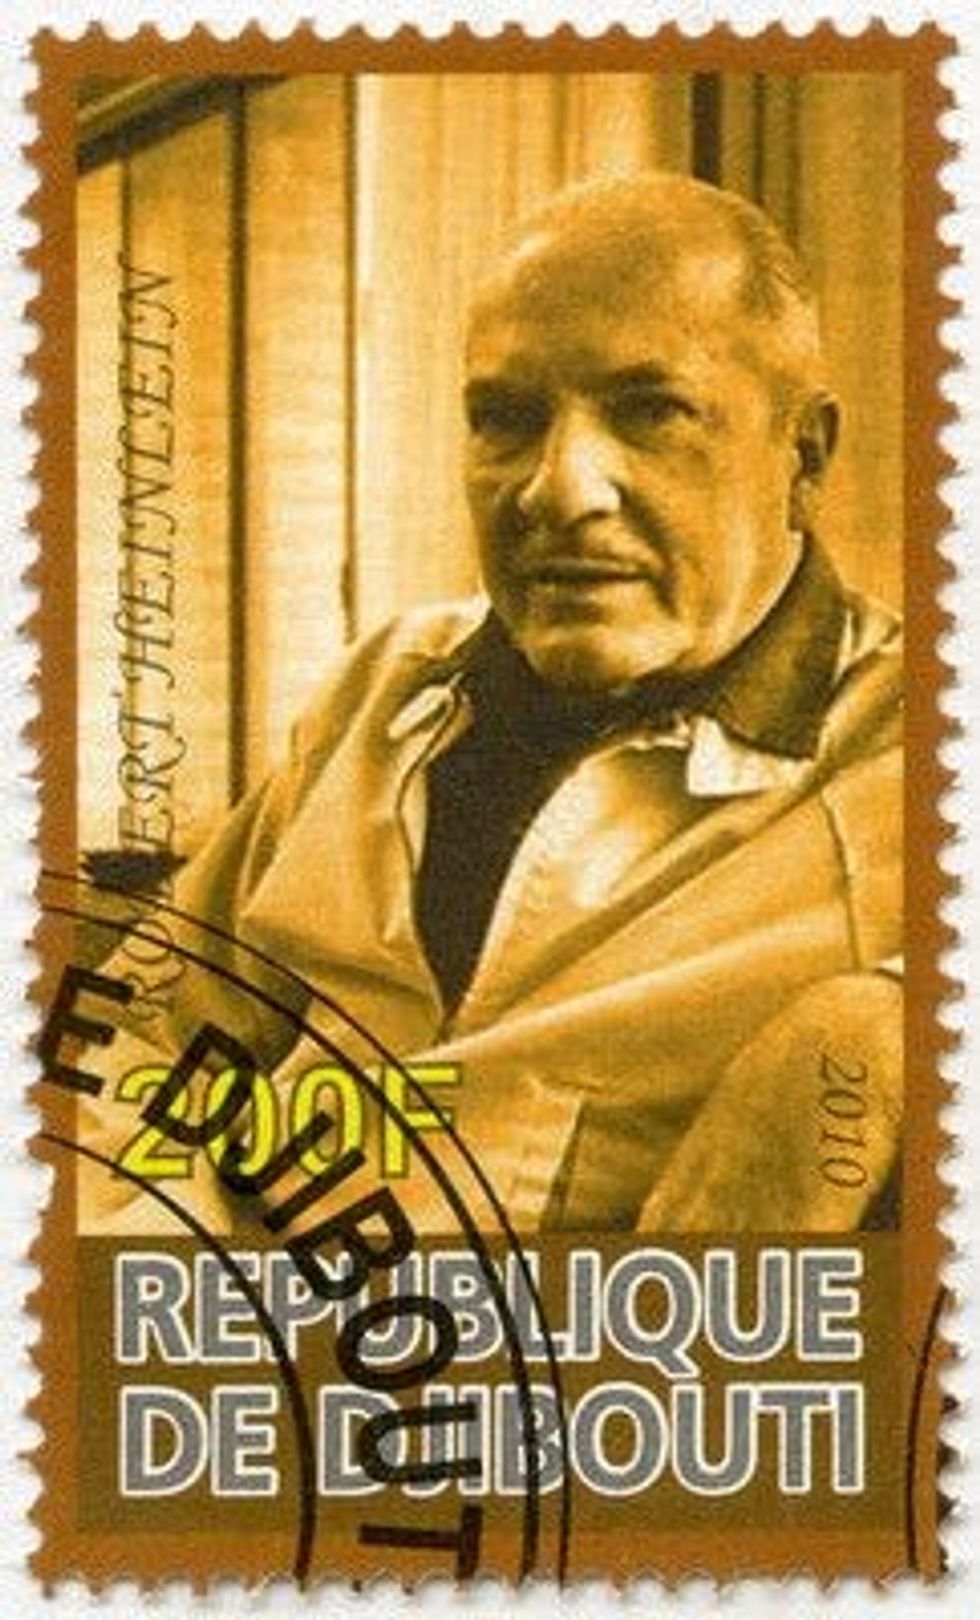 Robert Heinlein published 32 novels, 59 short stories, and 16 collections during his writing career.